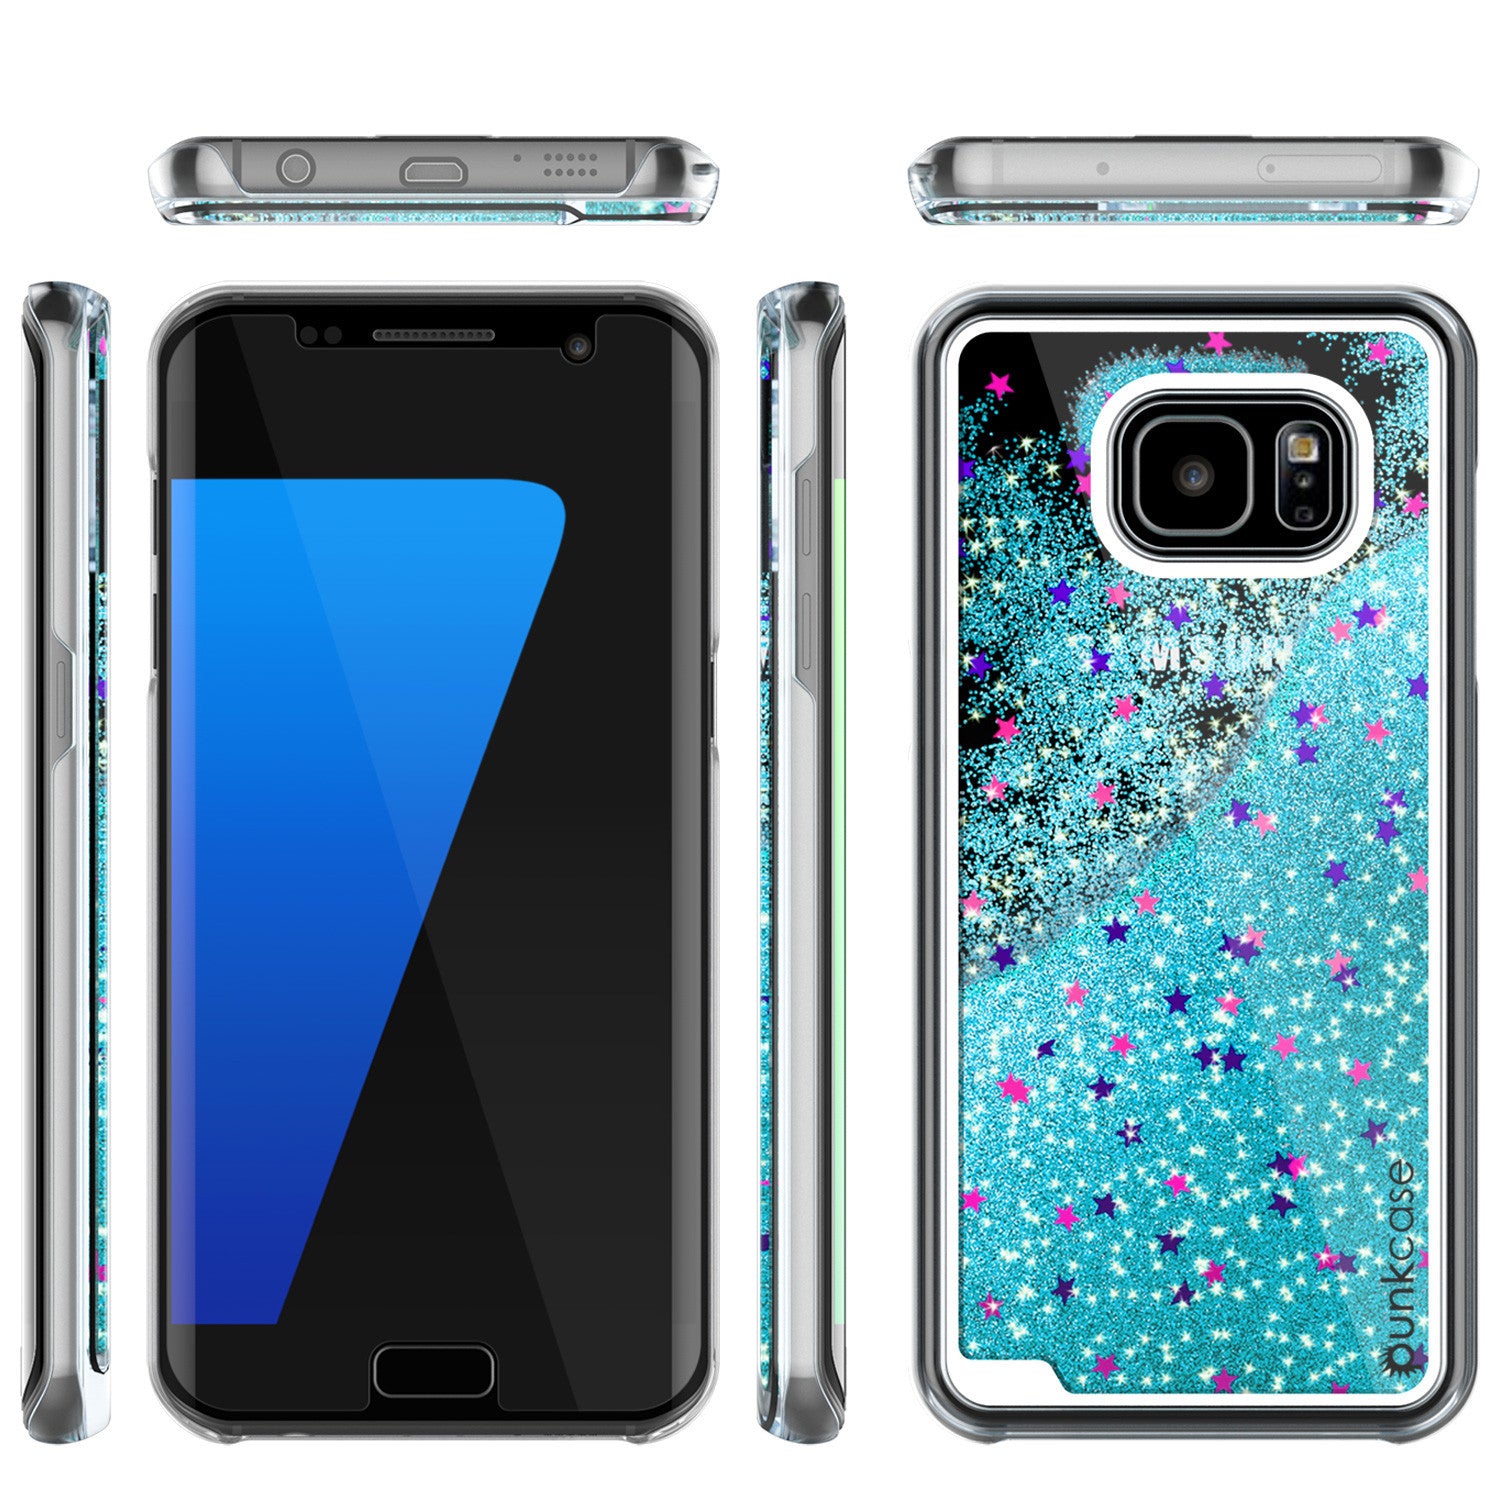 Samsung Galaxy S7 Edge Case, Punkcase [Liquid Teal Series] Protective Dual Layer Floating Glitter Cover + PunkShield Screen Protector